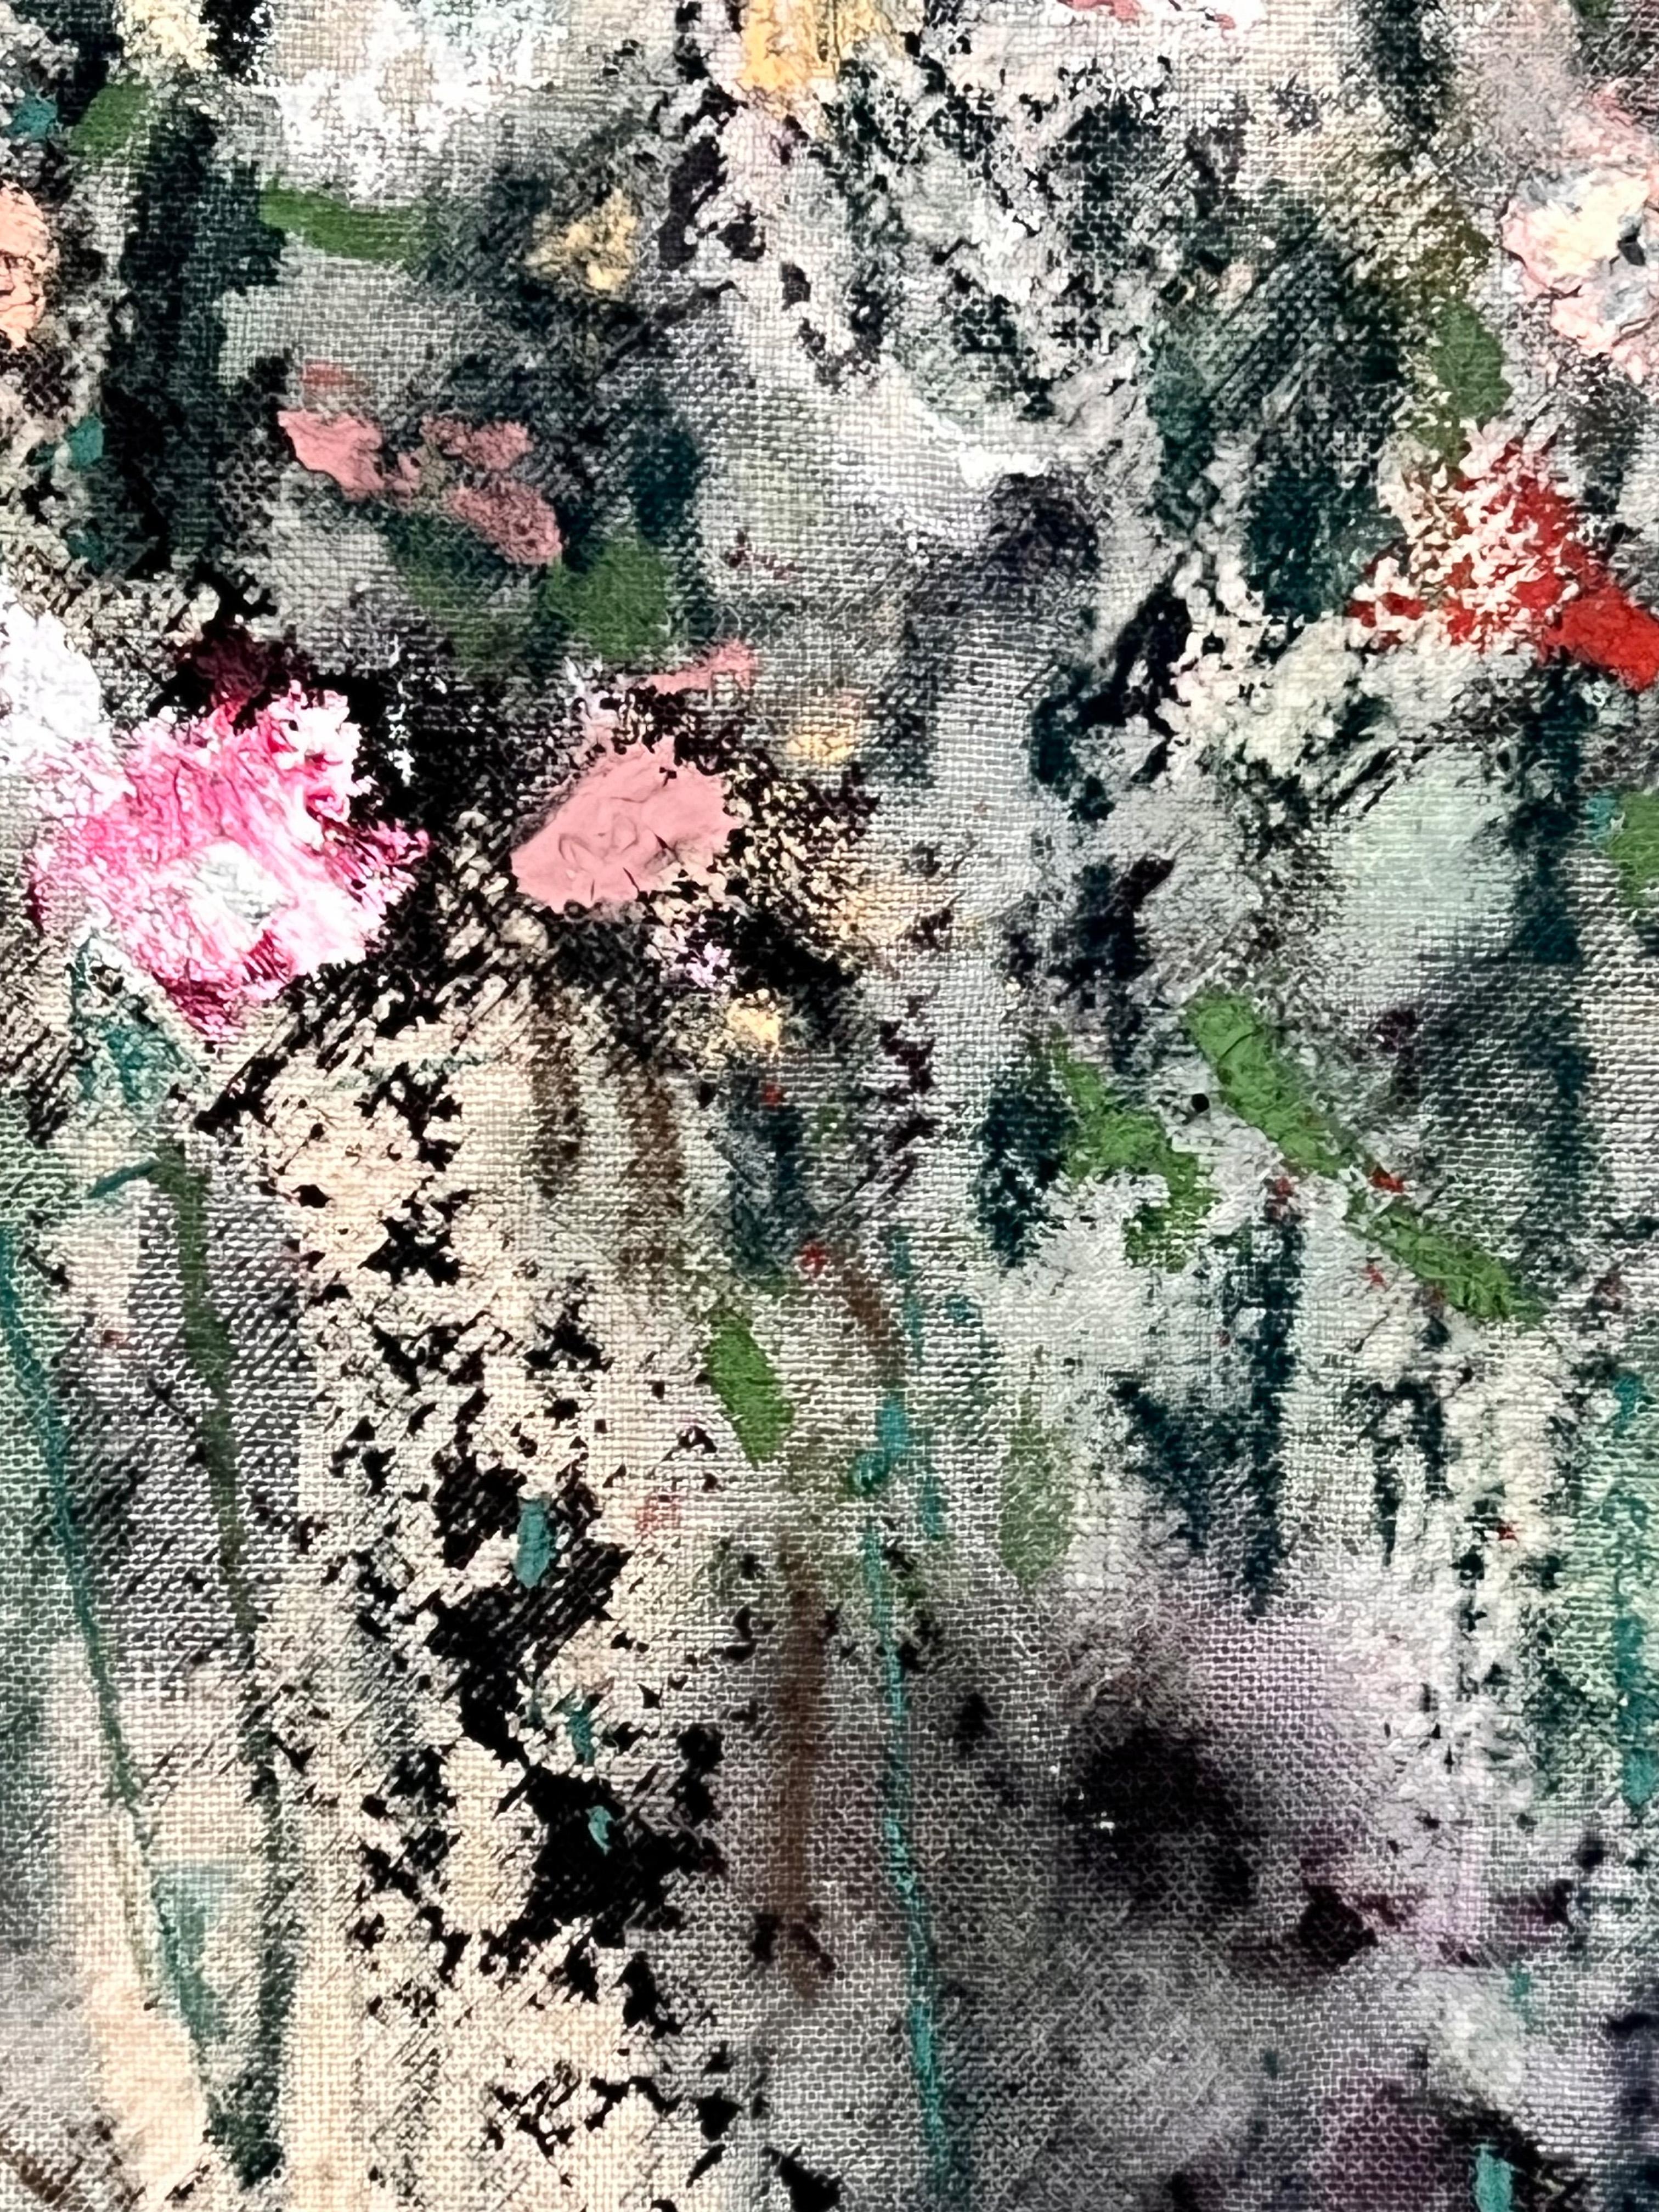 FLORUIT
2024
Paris, France

This complex and layered floral painting of an abstract vase of flowers presents an energetic and mesmerizing subject. This original painting on cotton canvas utilizes a range of mediums including oil paint, oil stick,